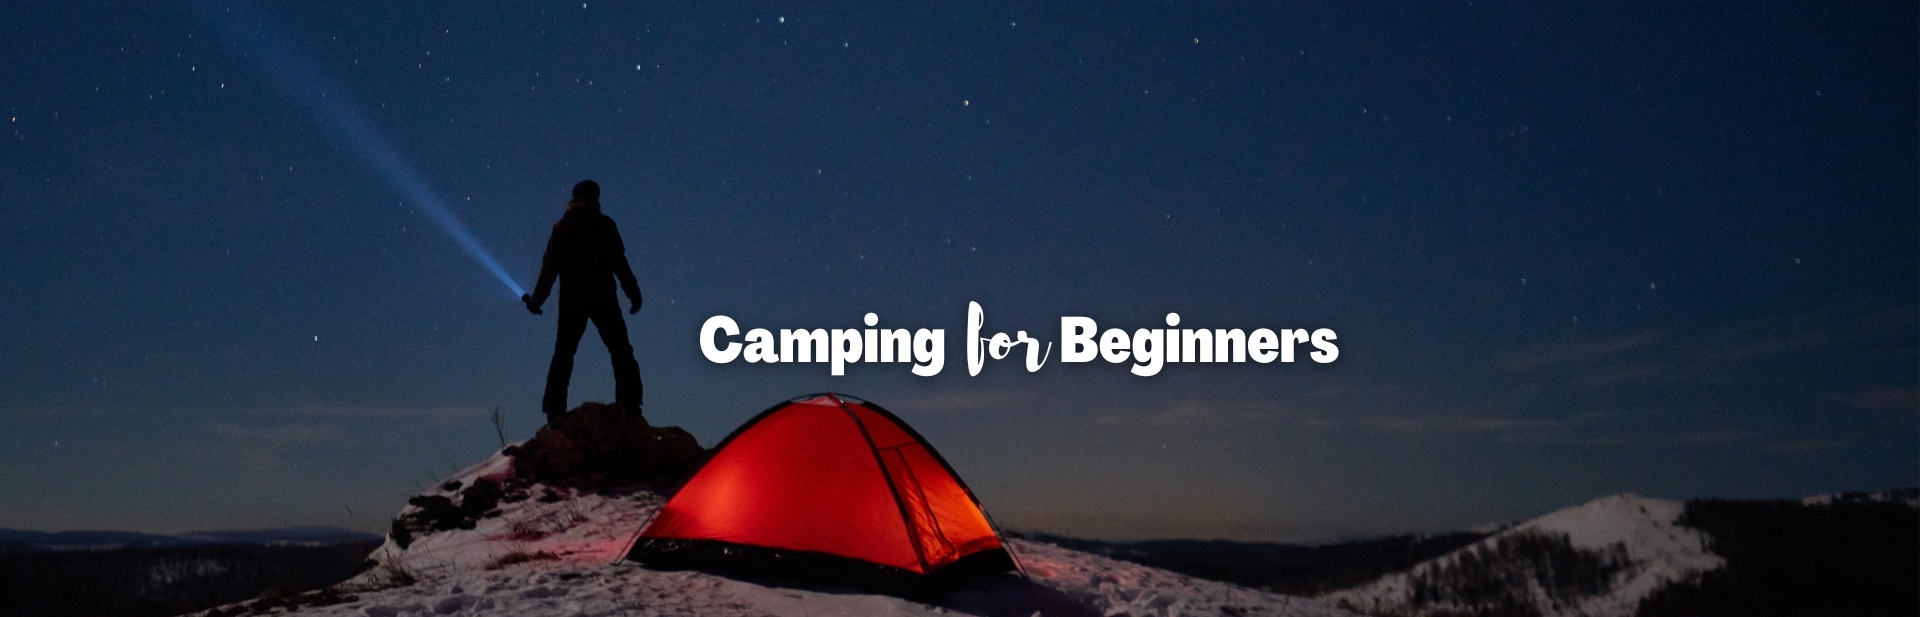 Camping For Beginners: Tips and Guide in Setting Up Your First Campsite